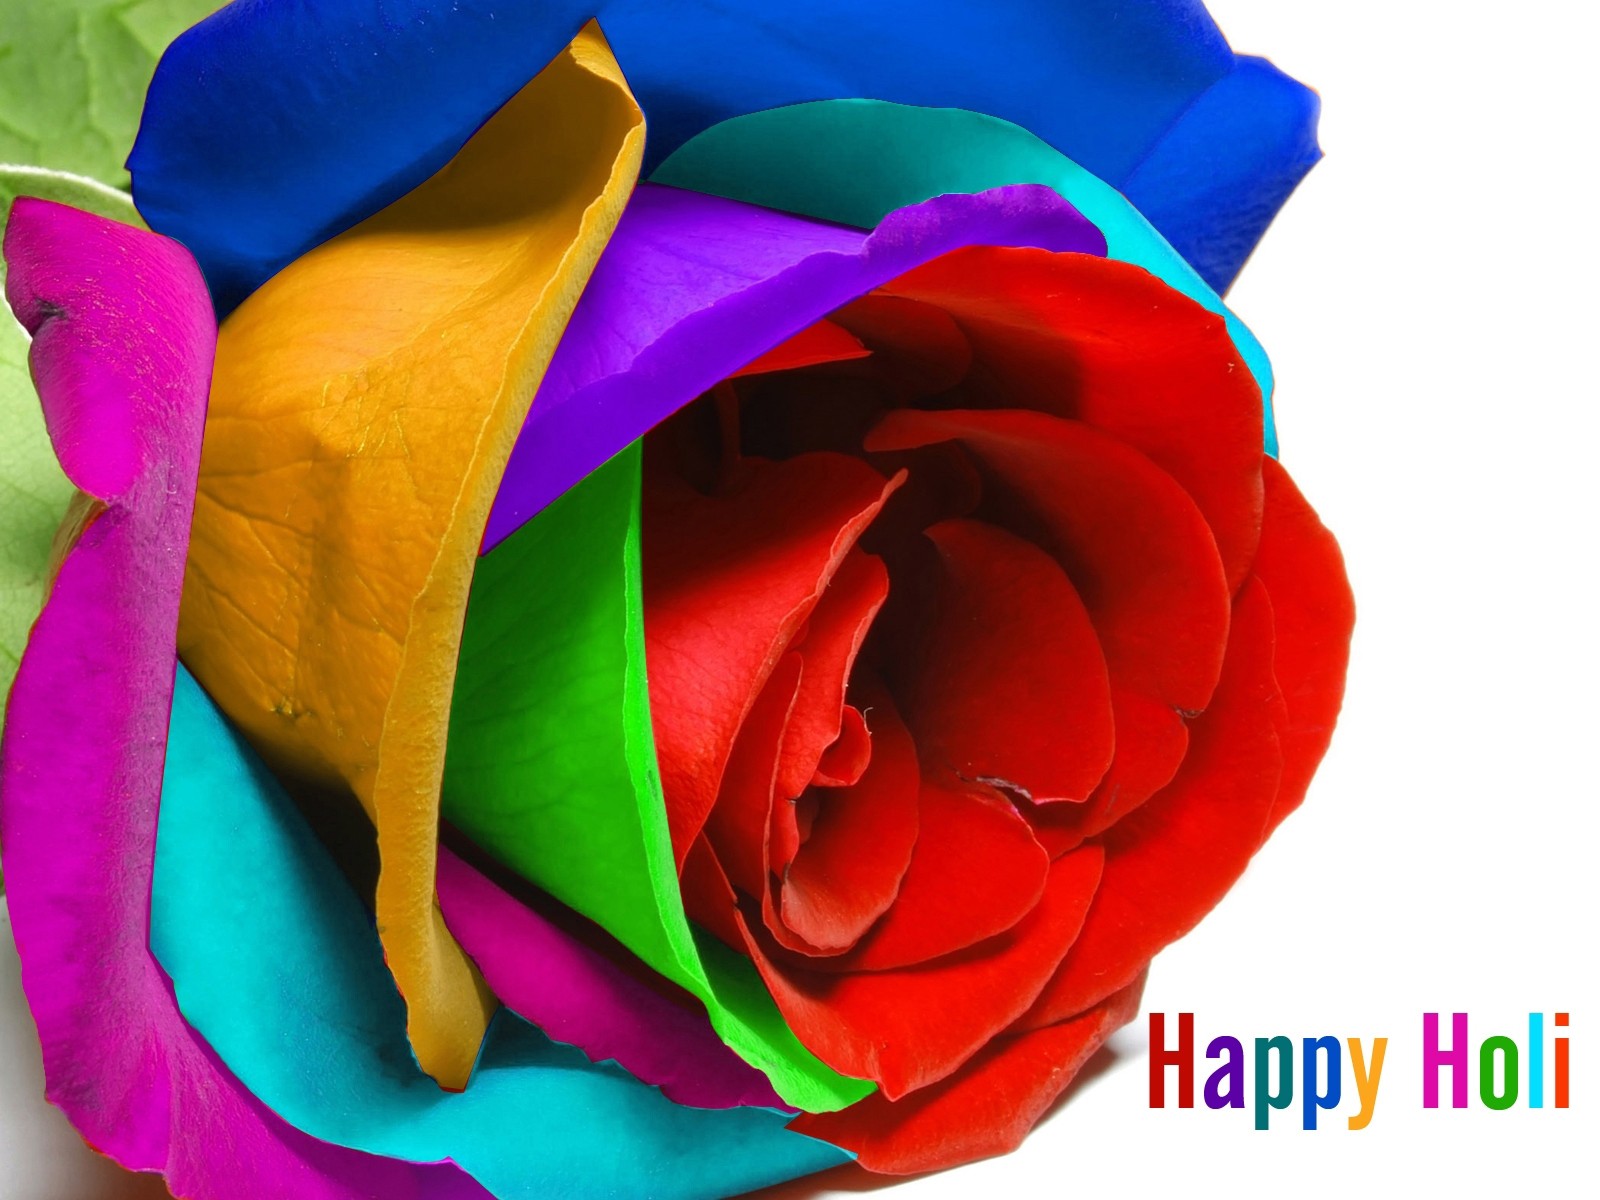 colorful rose happy holi wishes hd wallpaper